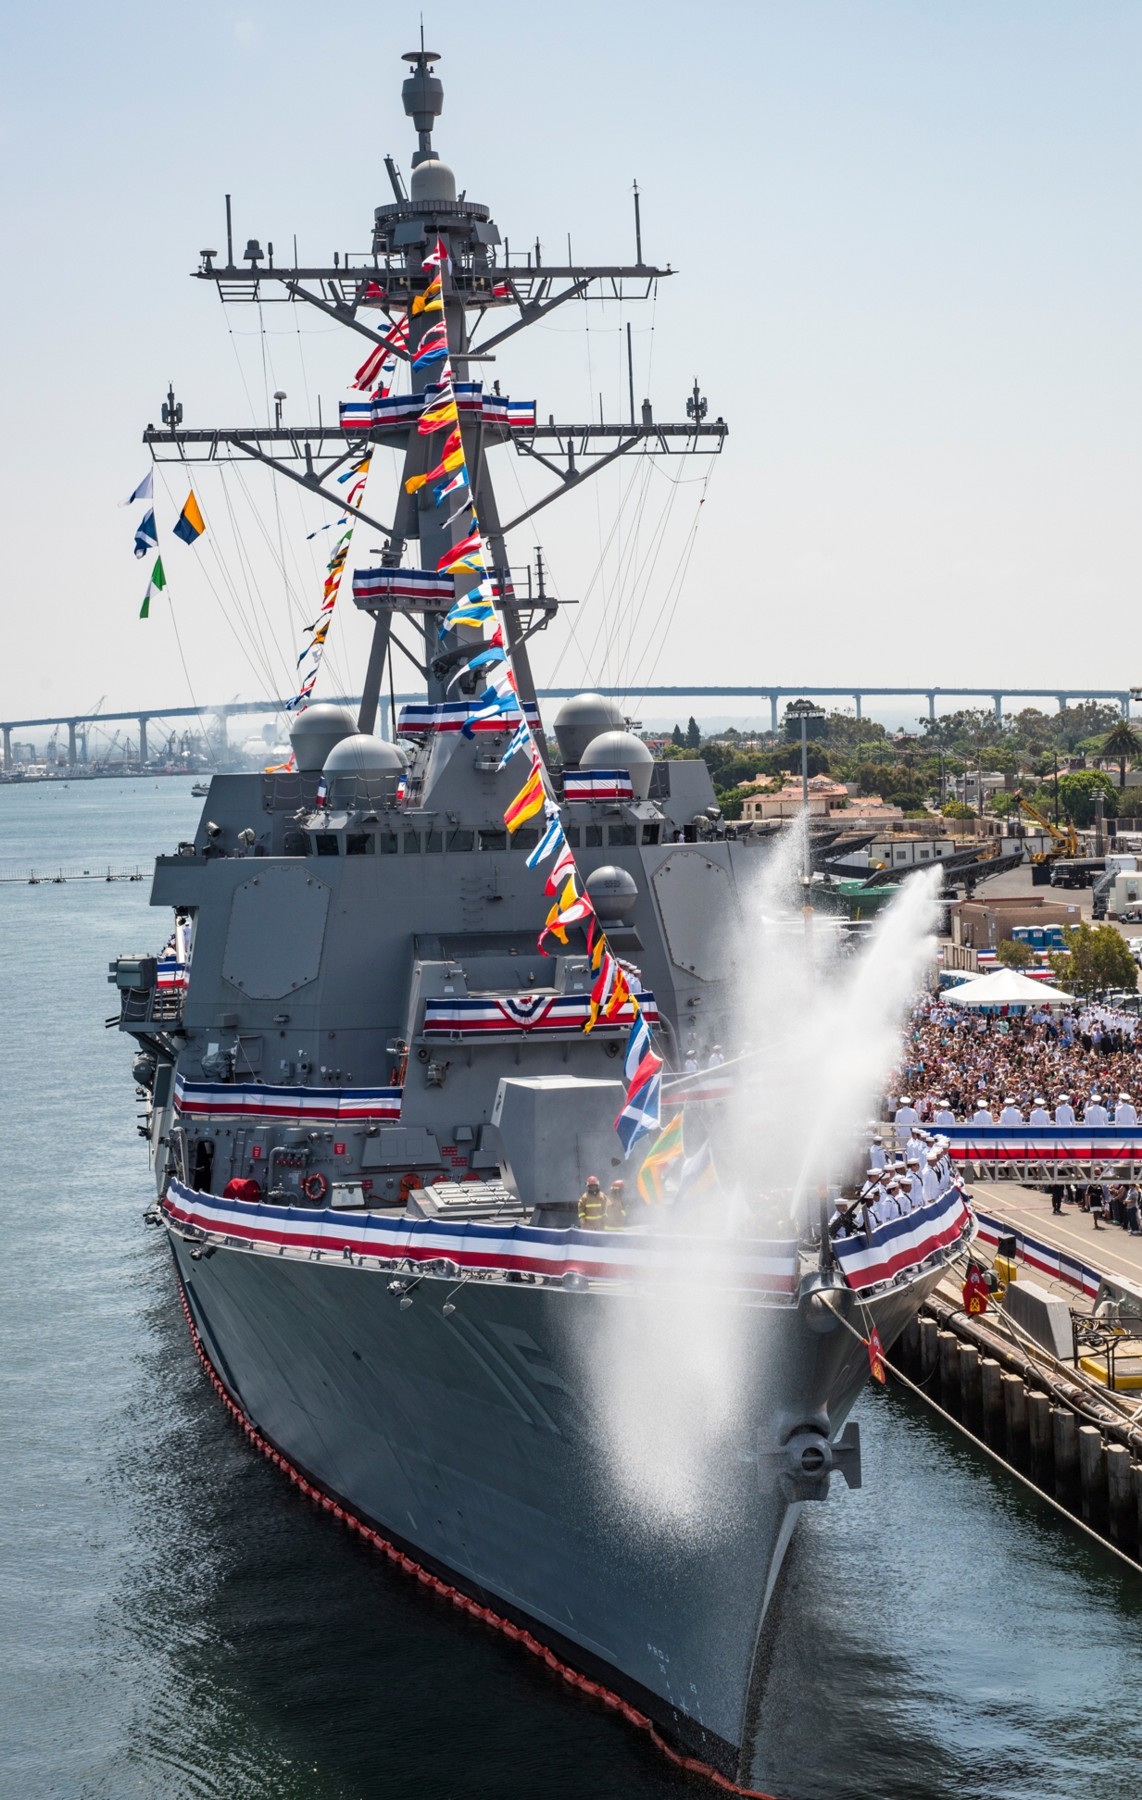 ddg-115 uss rafael peralta arleigh burke class guided missile destroyer us navy aegis 02 commissioning ceremony nas north island